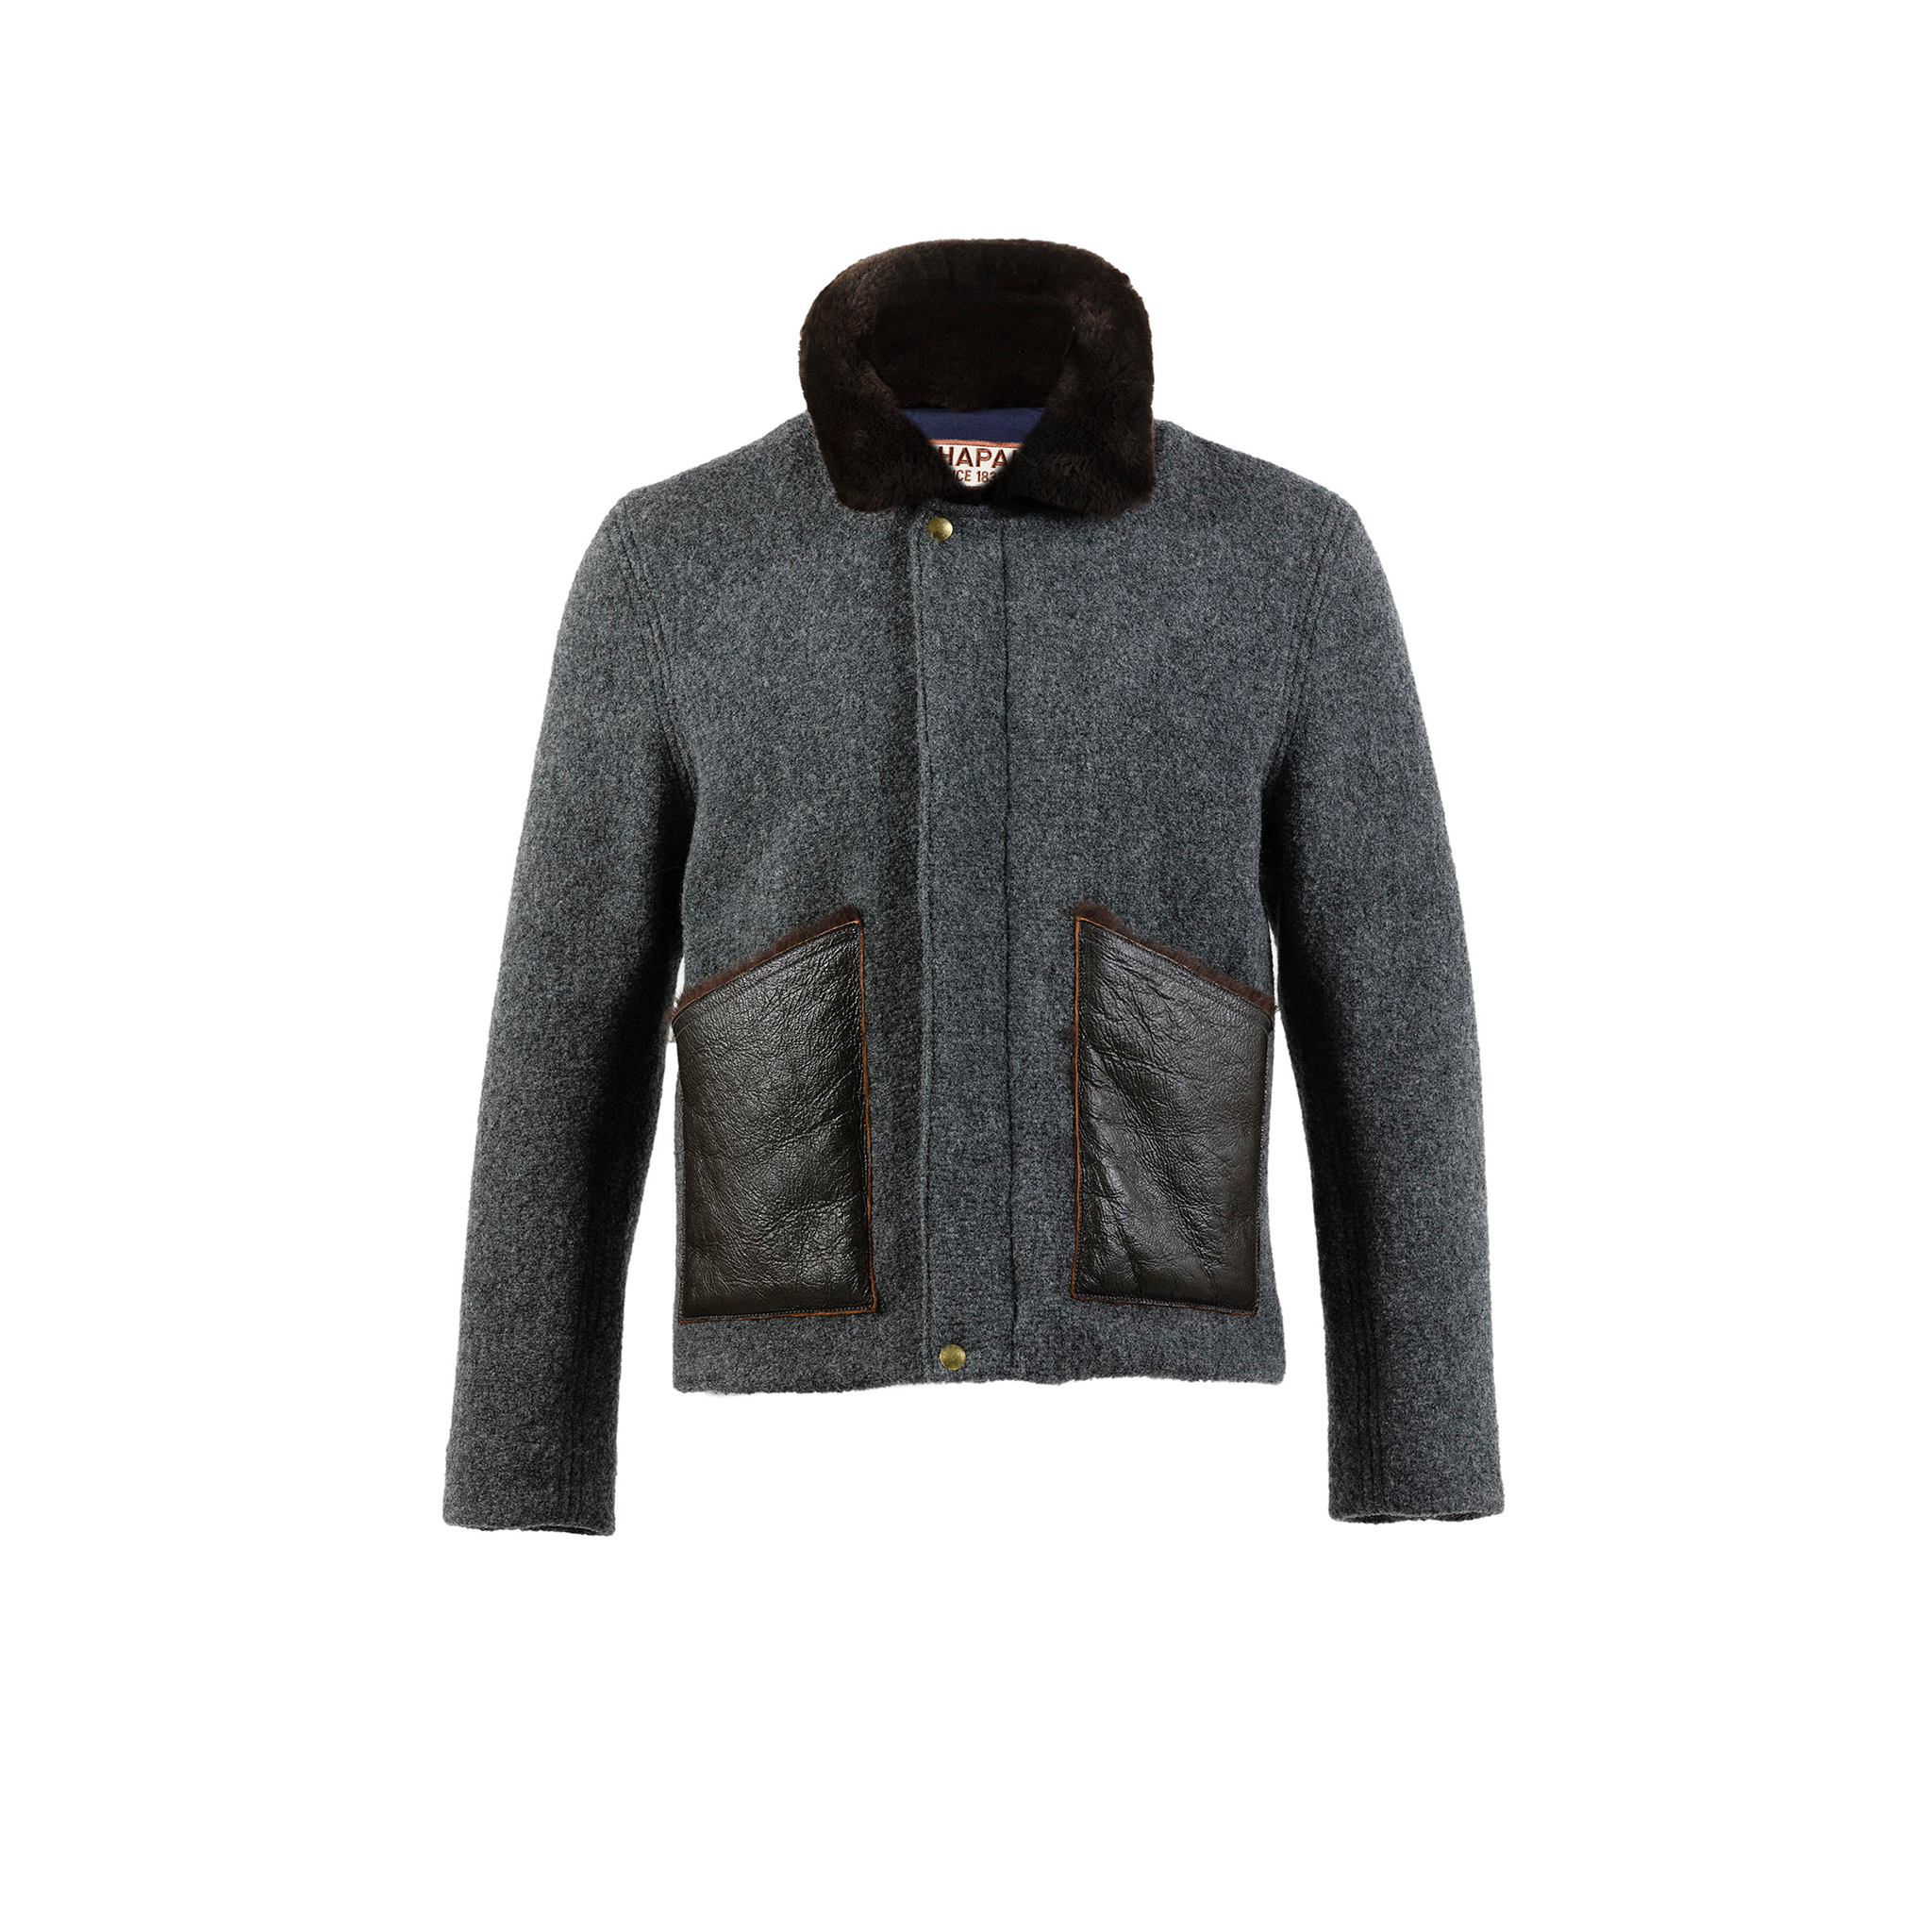 Bomber Country Jacket - Merino wool - Grey color